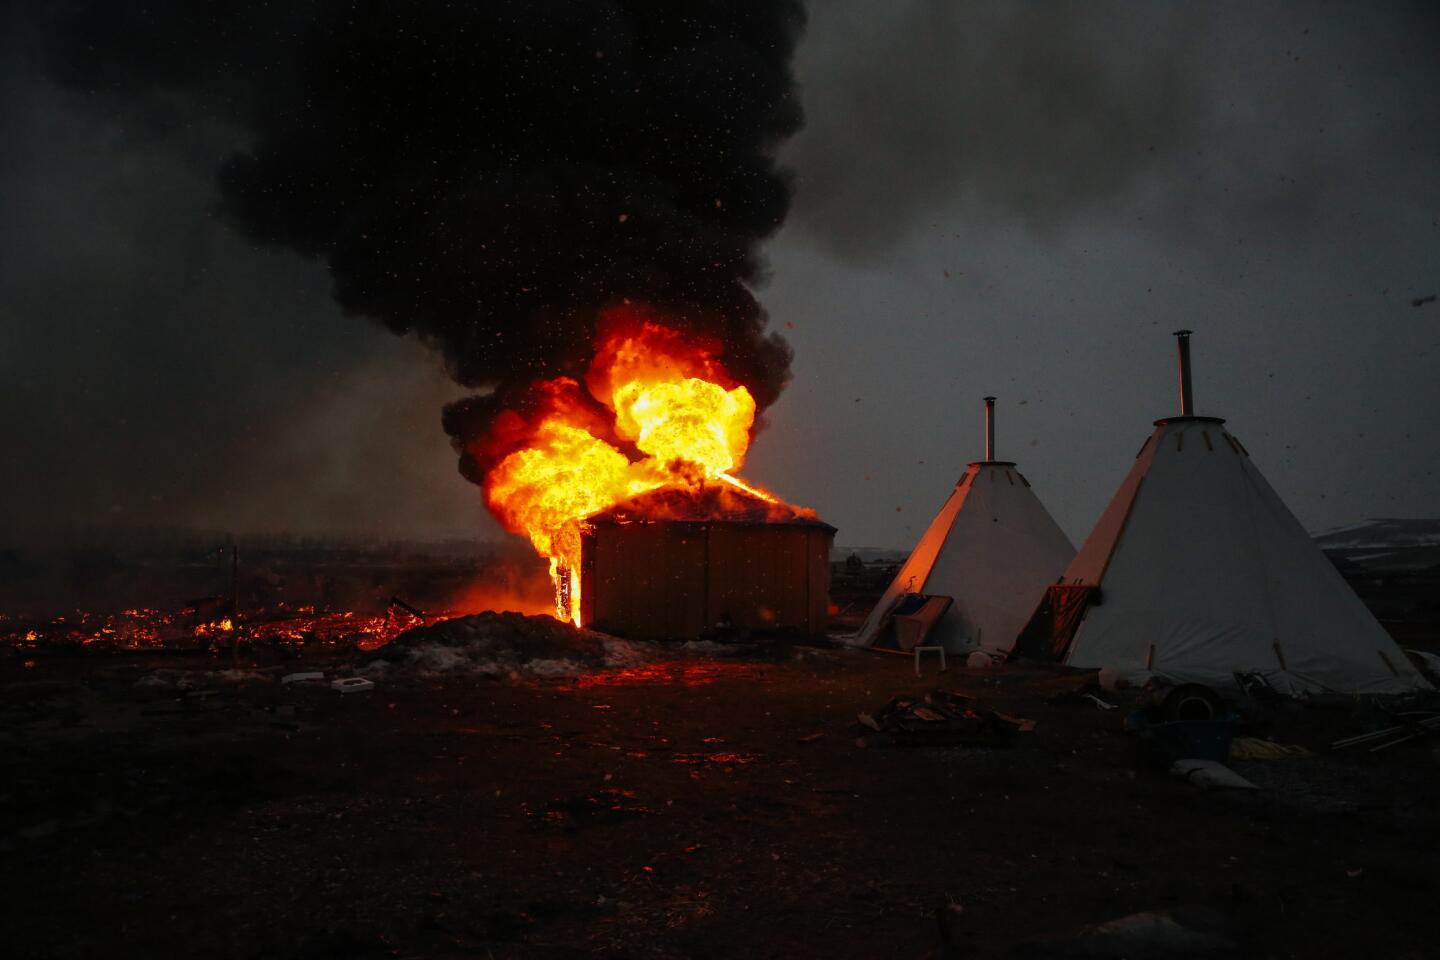 Campers set structures on fire in preparation of the Army Corps of Engineers' deadline to leave the Oceti Sakowin protest camp in Cannon Ball, N.D. Activists and protesters have occupied the Standing Rock Sioux reservation for months in opposotion to the completion of the Dakota Access Pipeline.